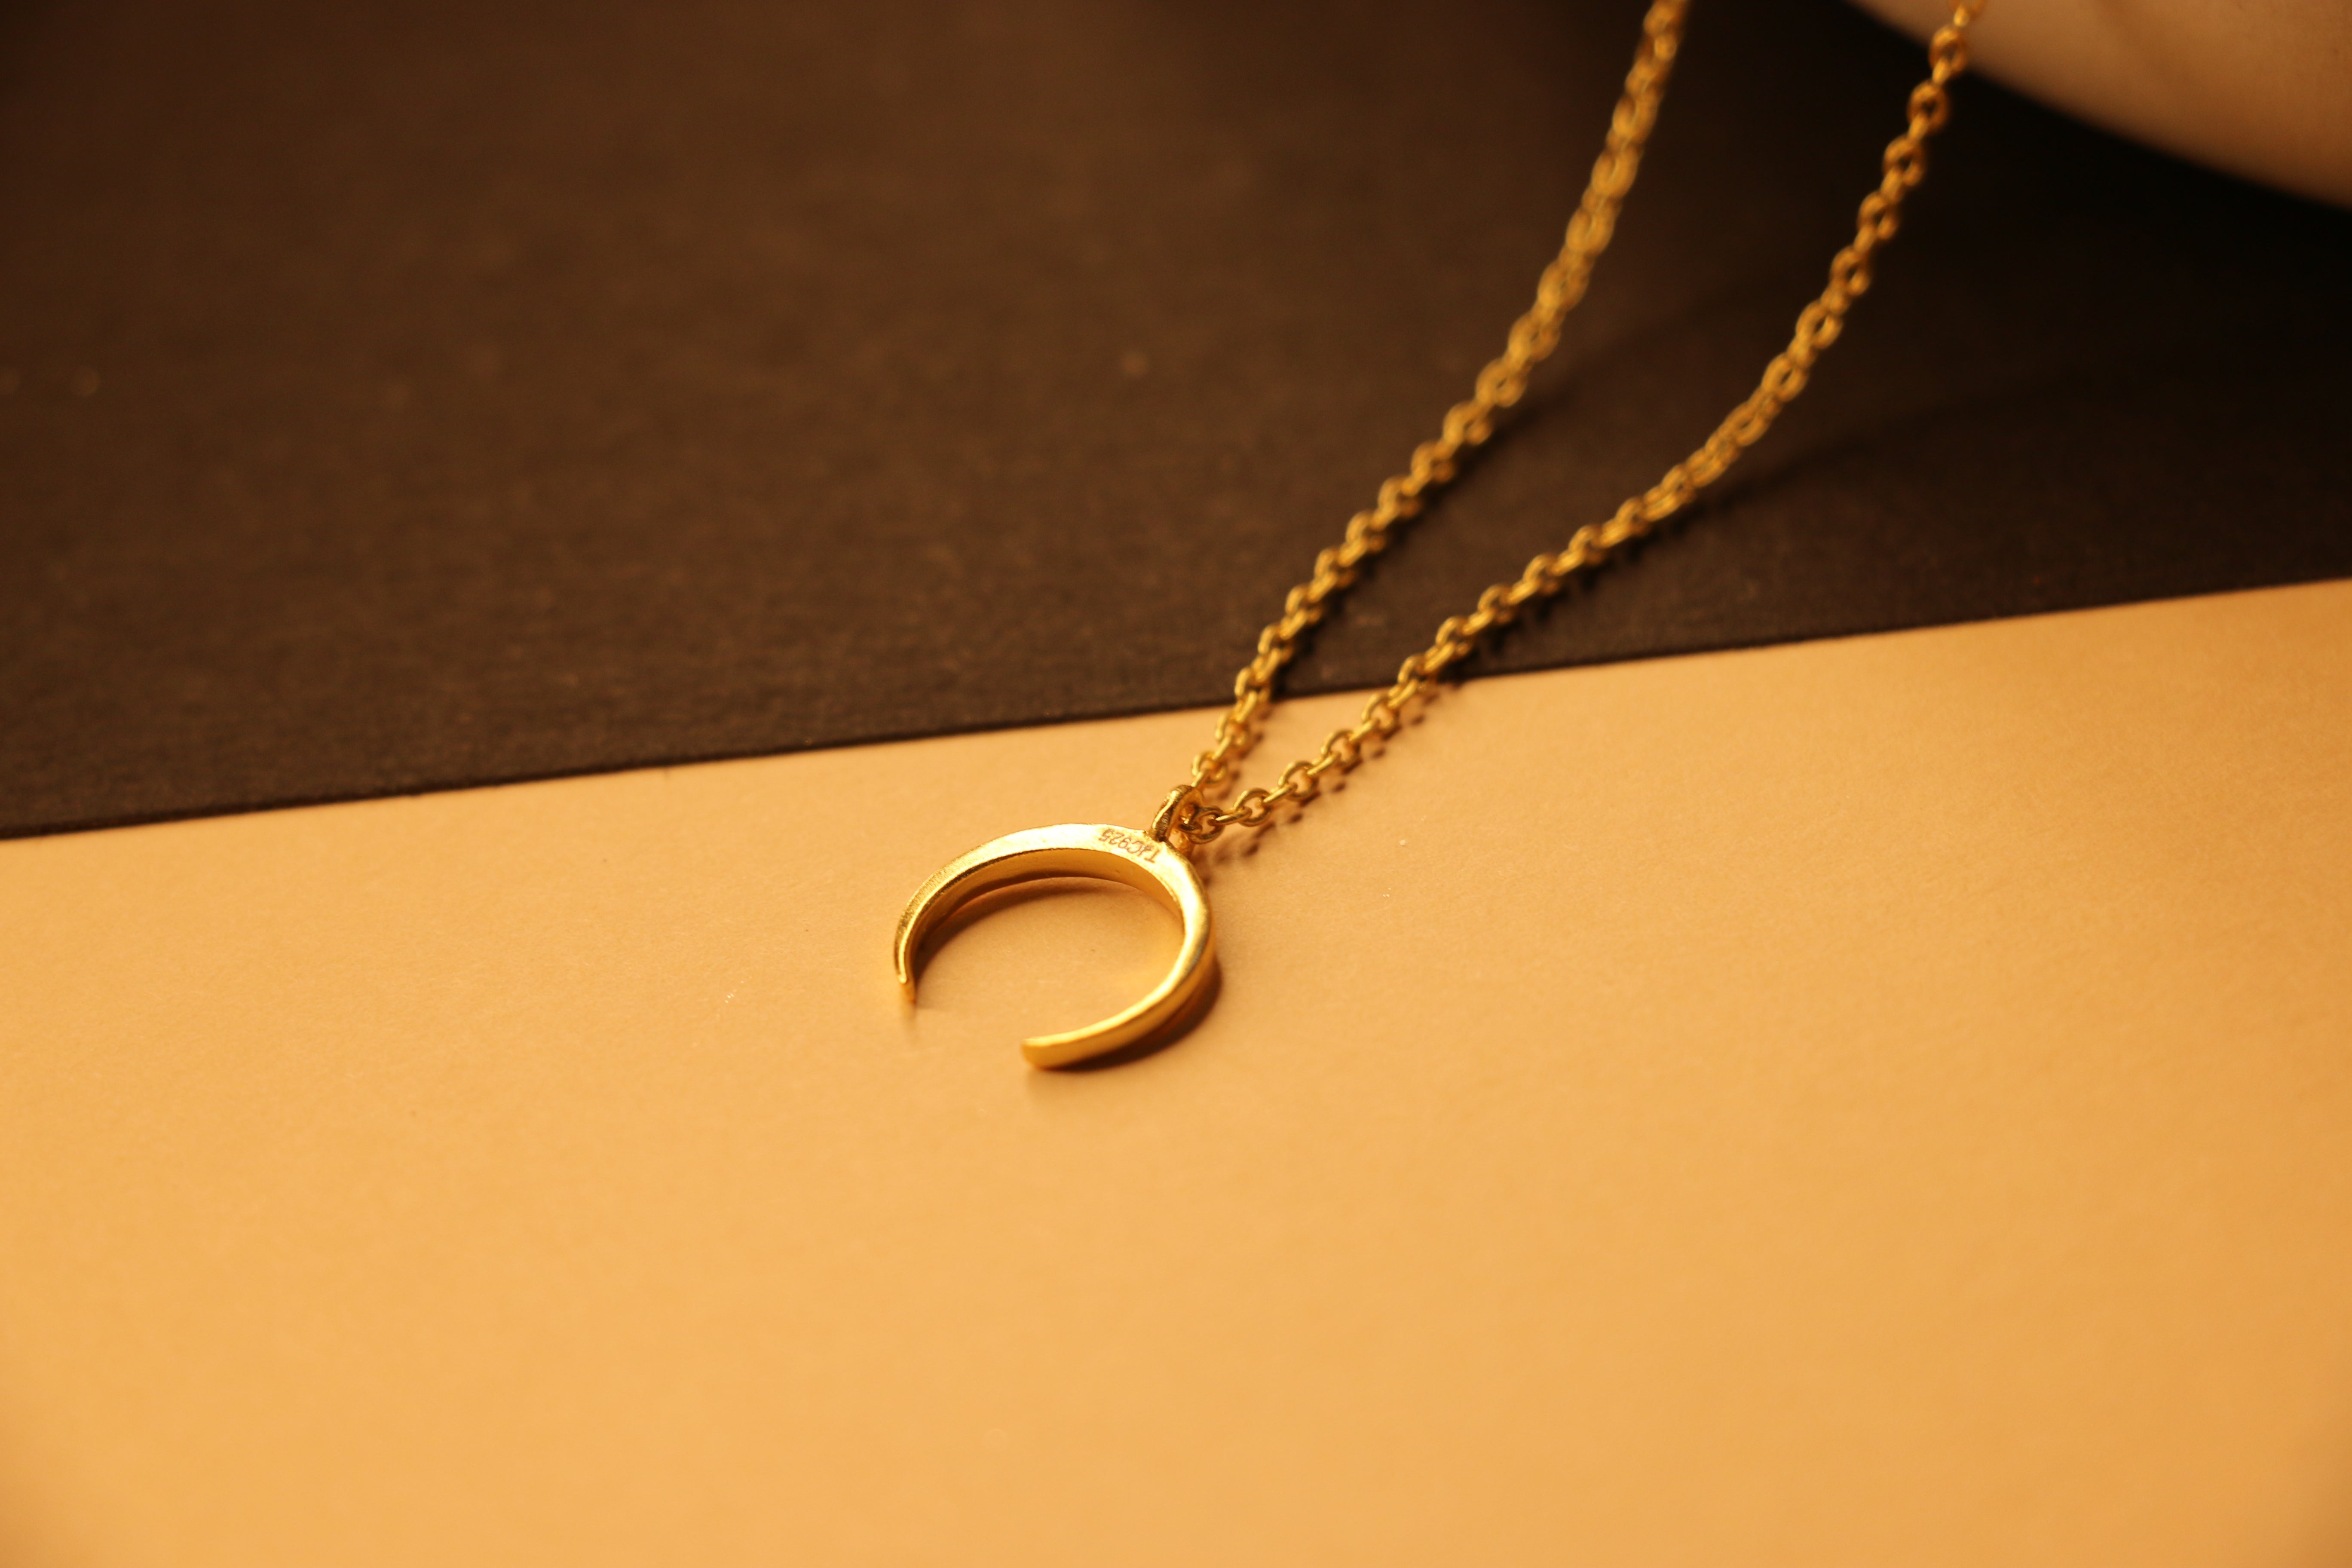 Moon shaped necklace